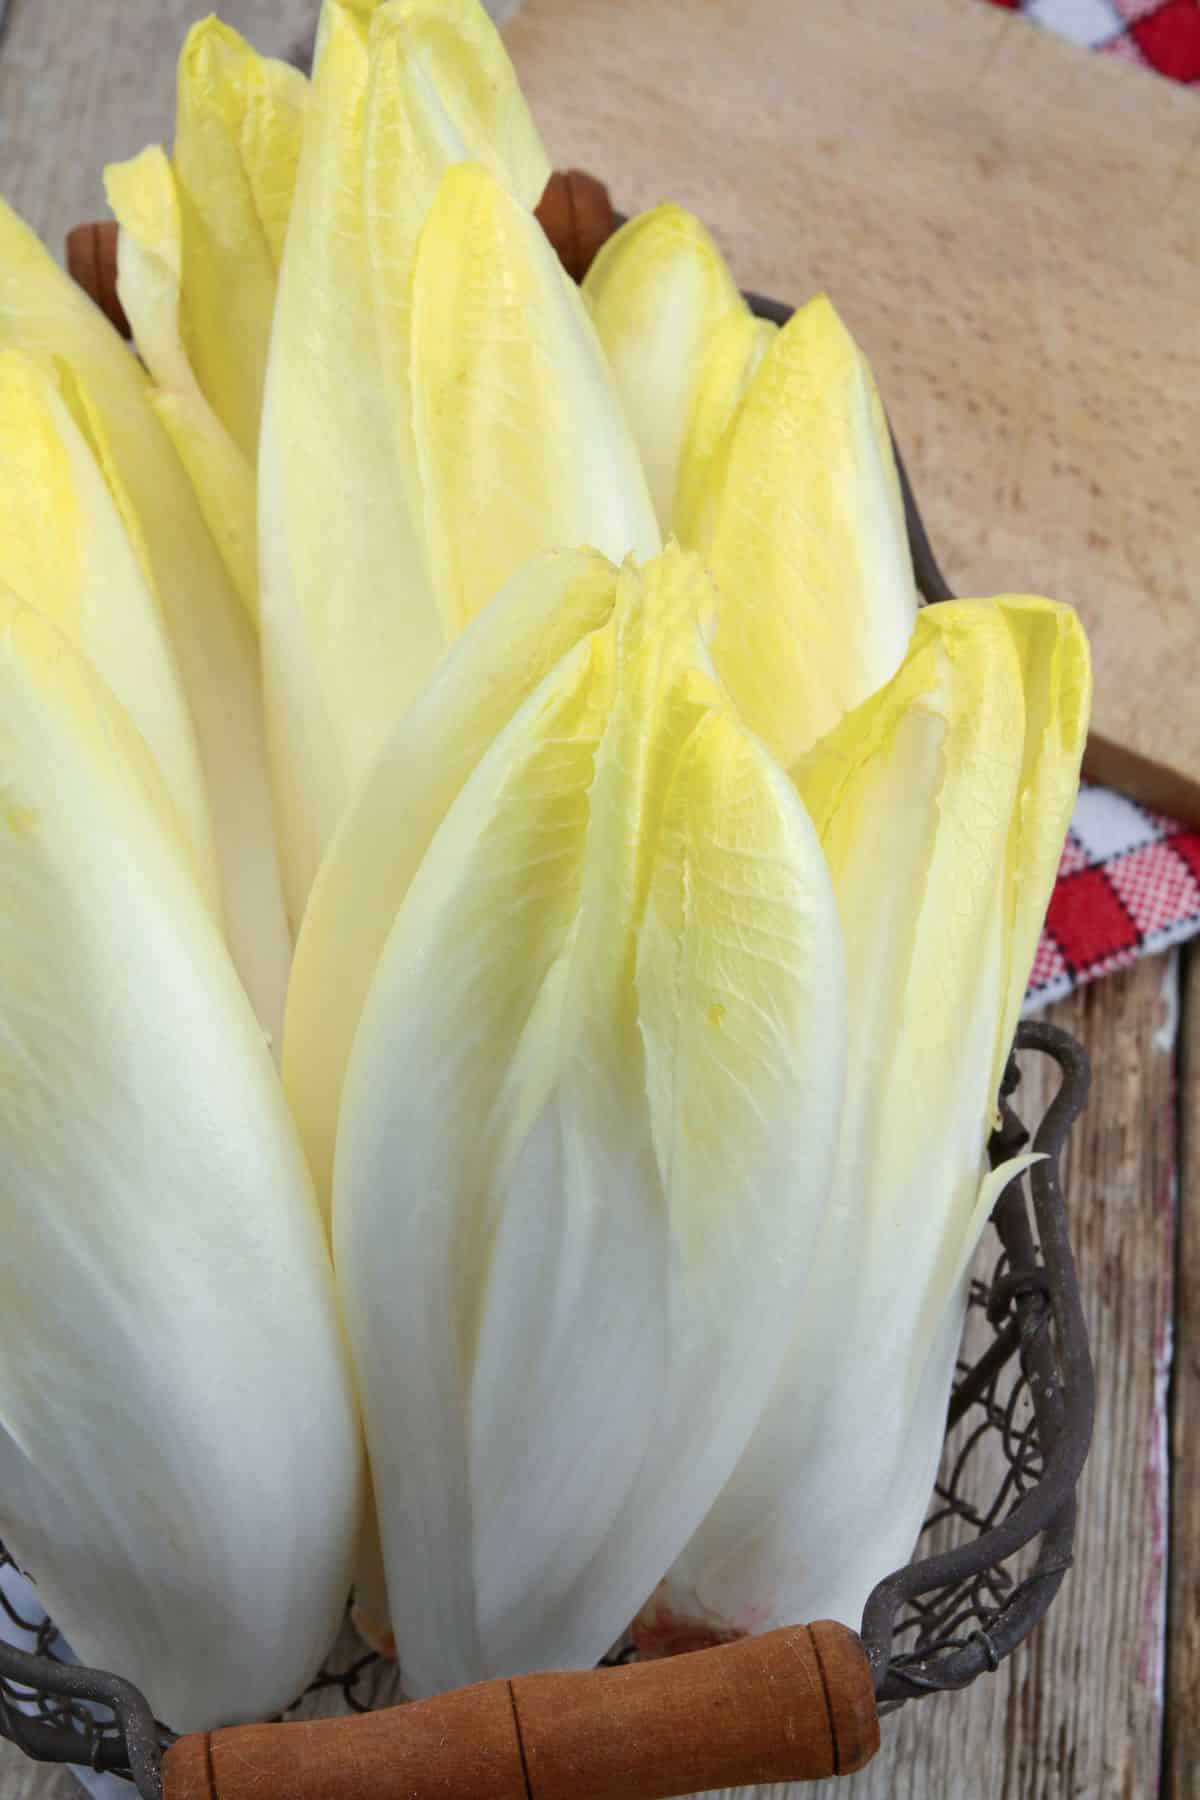 photo of endive on table.